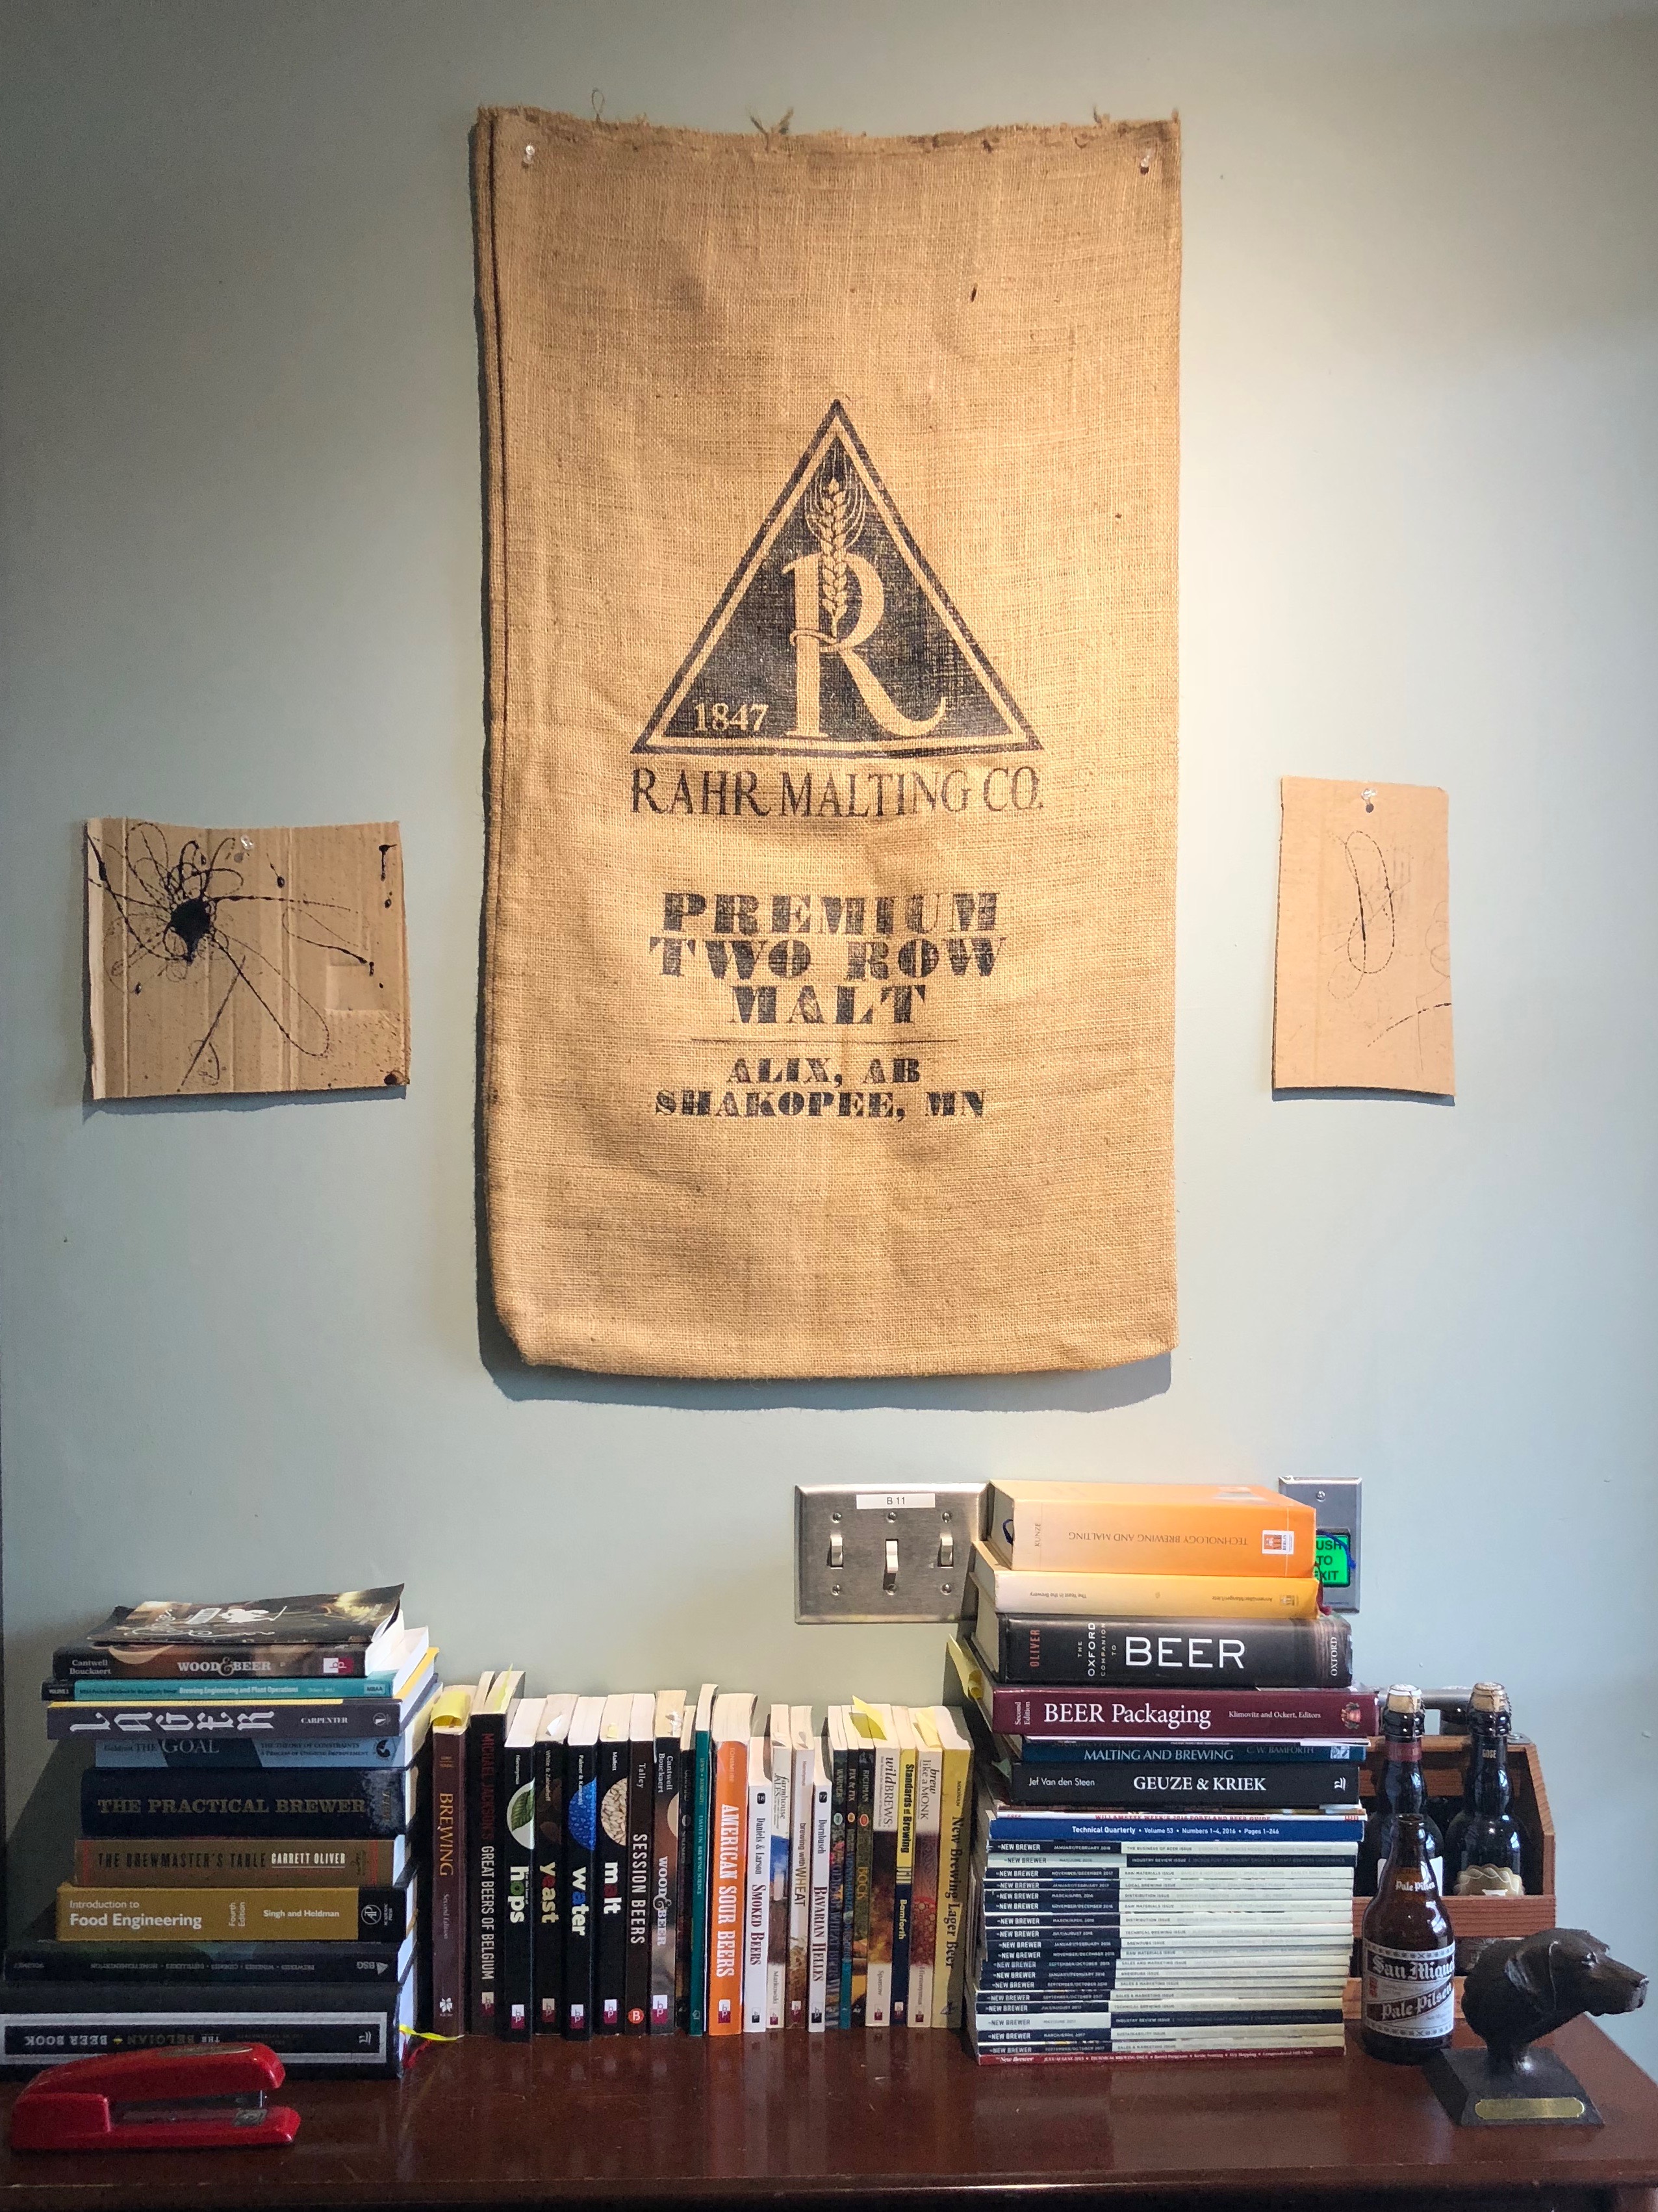 Rahr malt bags hang on the wall in an office area at pFriem Family Brewers.